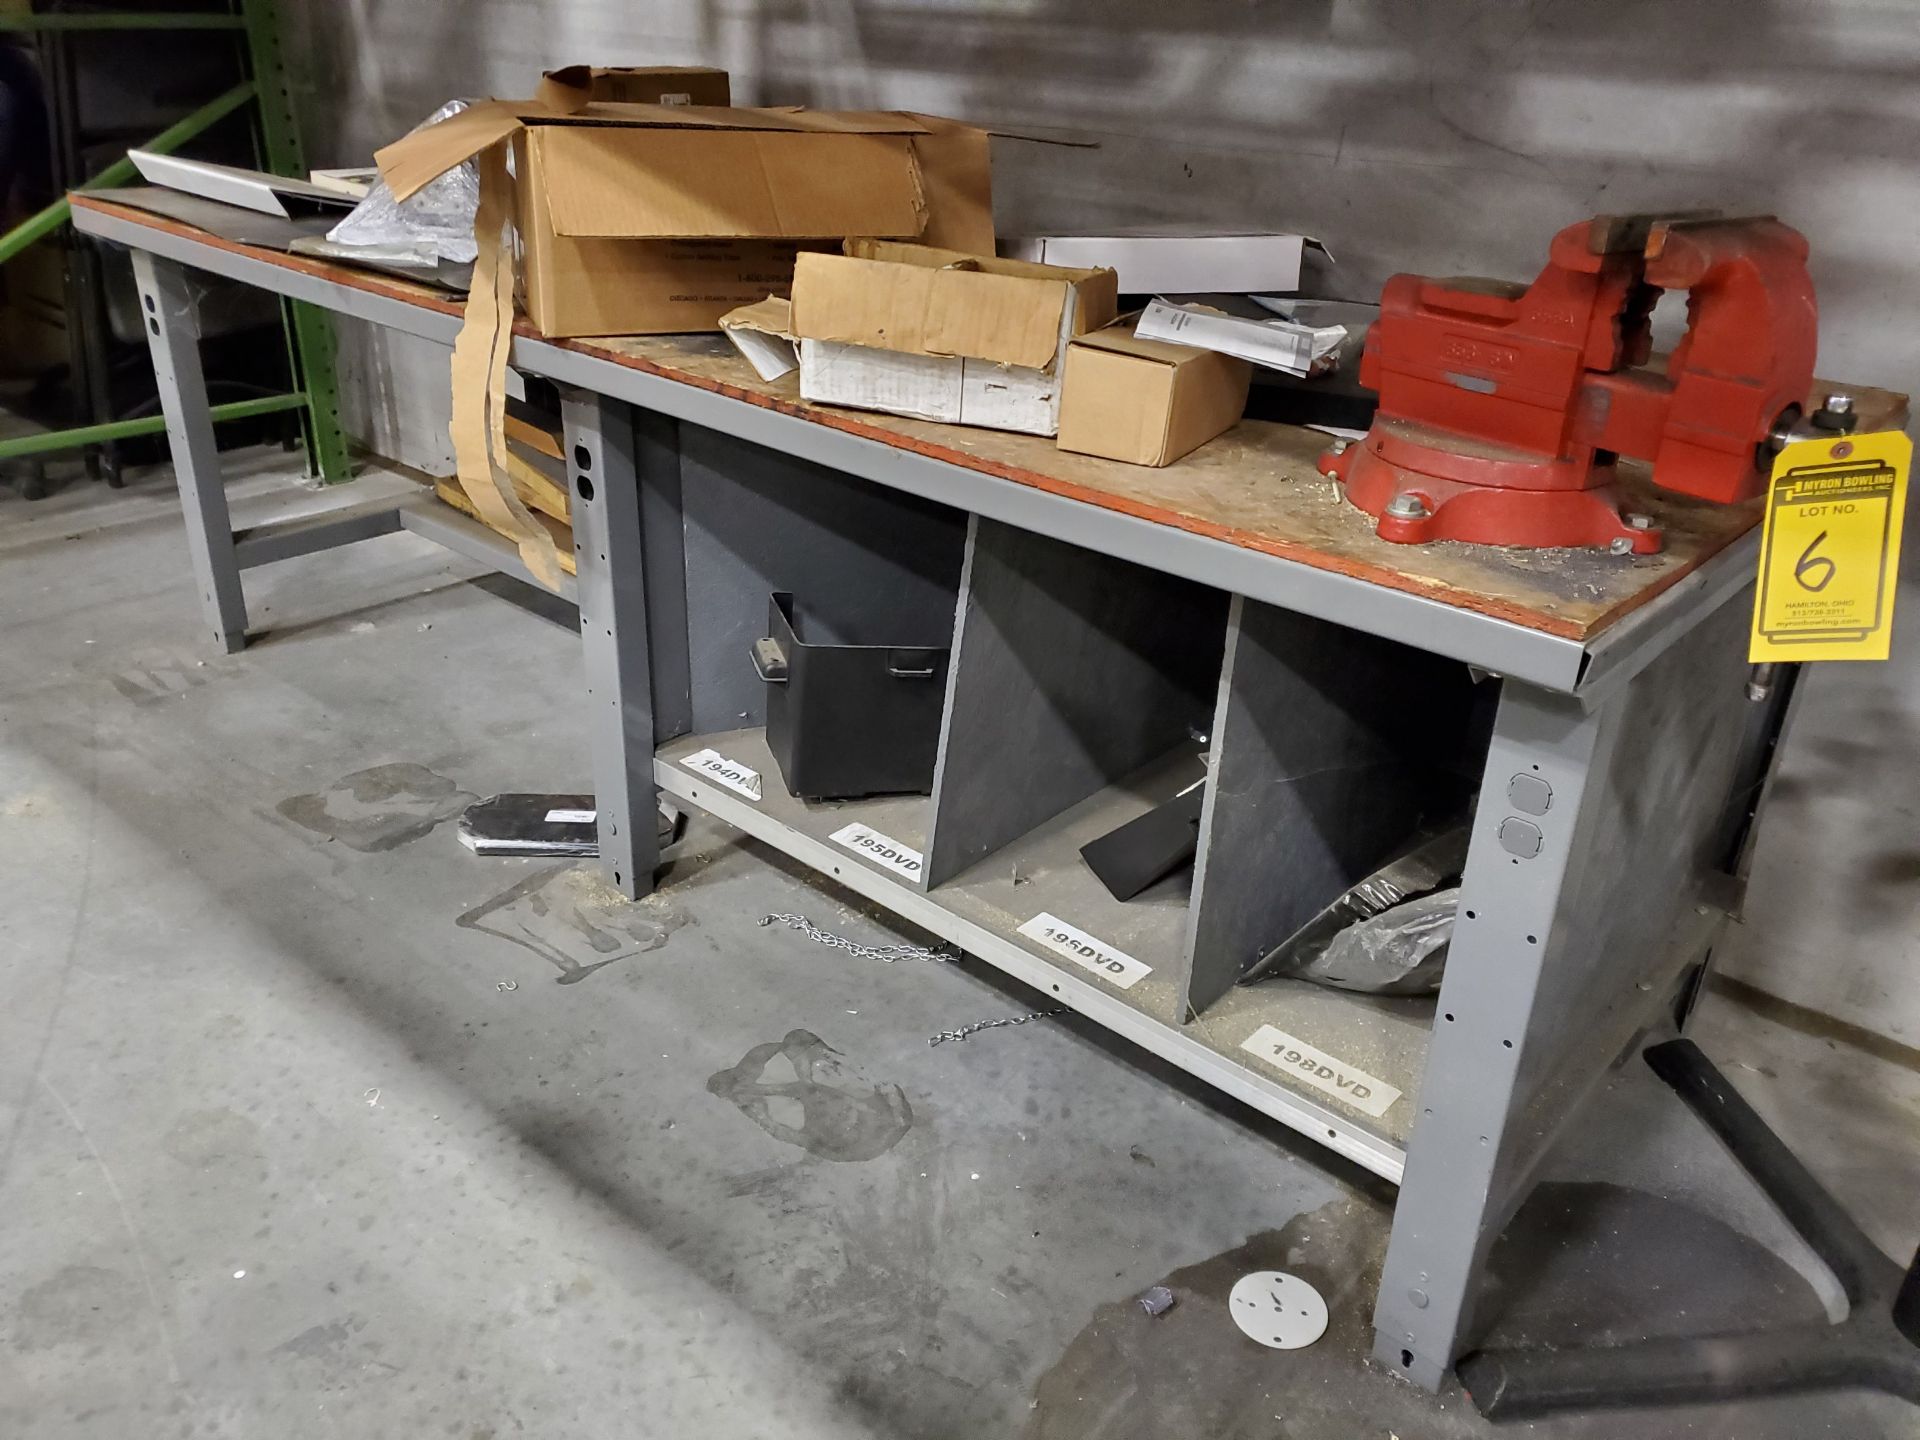 6’‘ ANVIL SWIVEL BENCH VISE ON ULINE METAL BENCH AND WELDING CURTAIN - Image 5 of 5